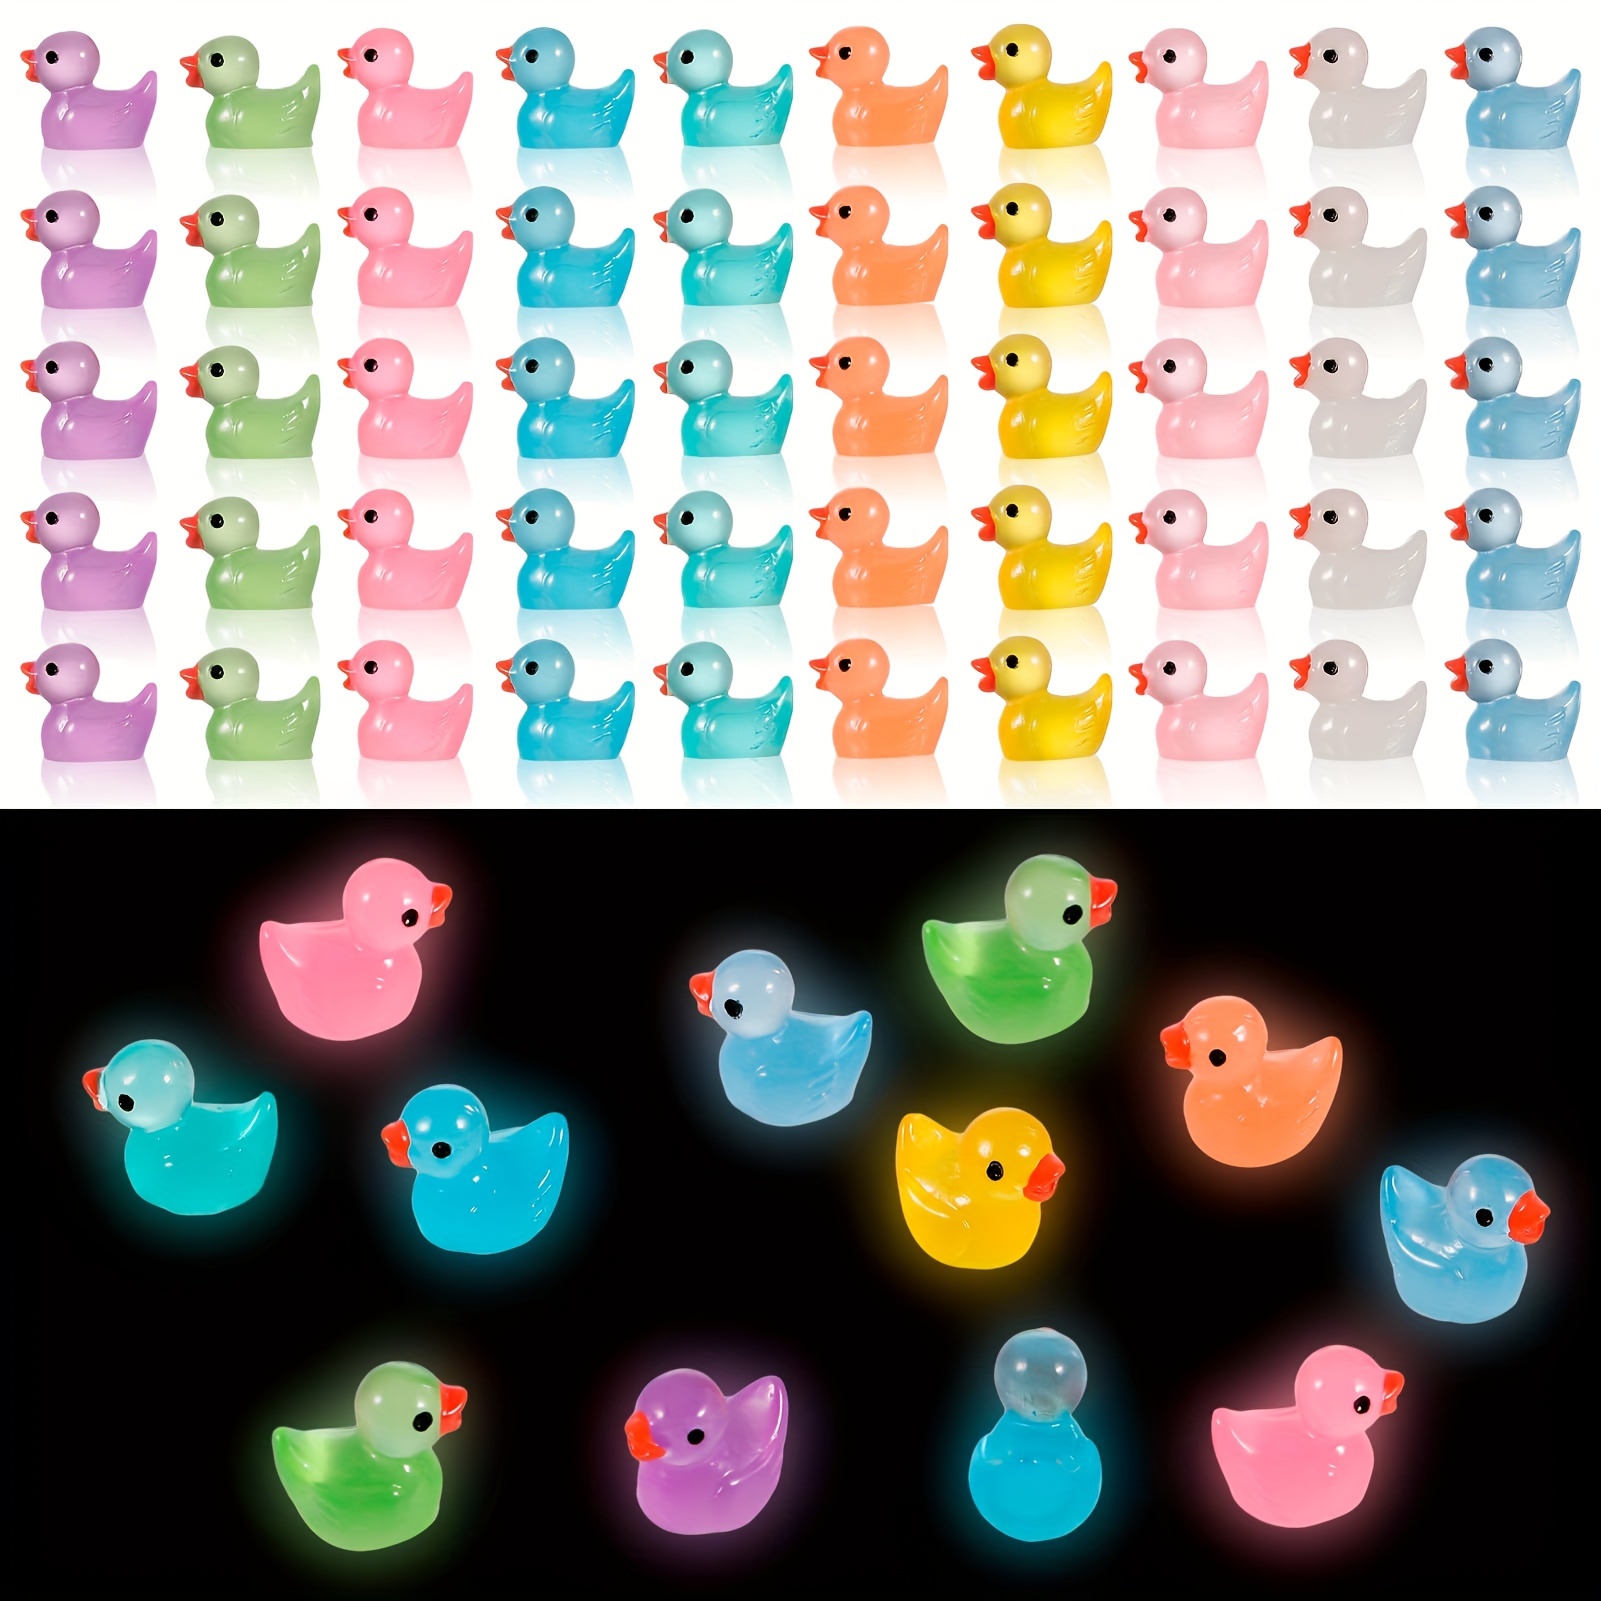 

100pcs Glow-in-the-dark Mini Resin Ducks - Colorful Luminous Fairy Garden & Potted Plant Decorations, No Battery Required